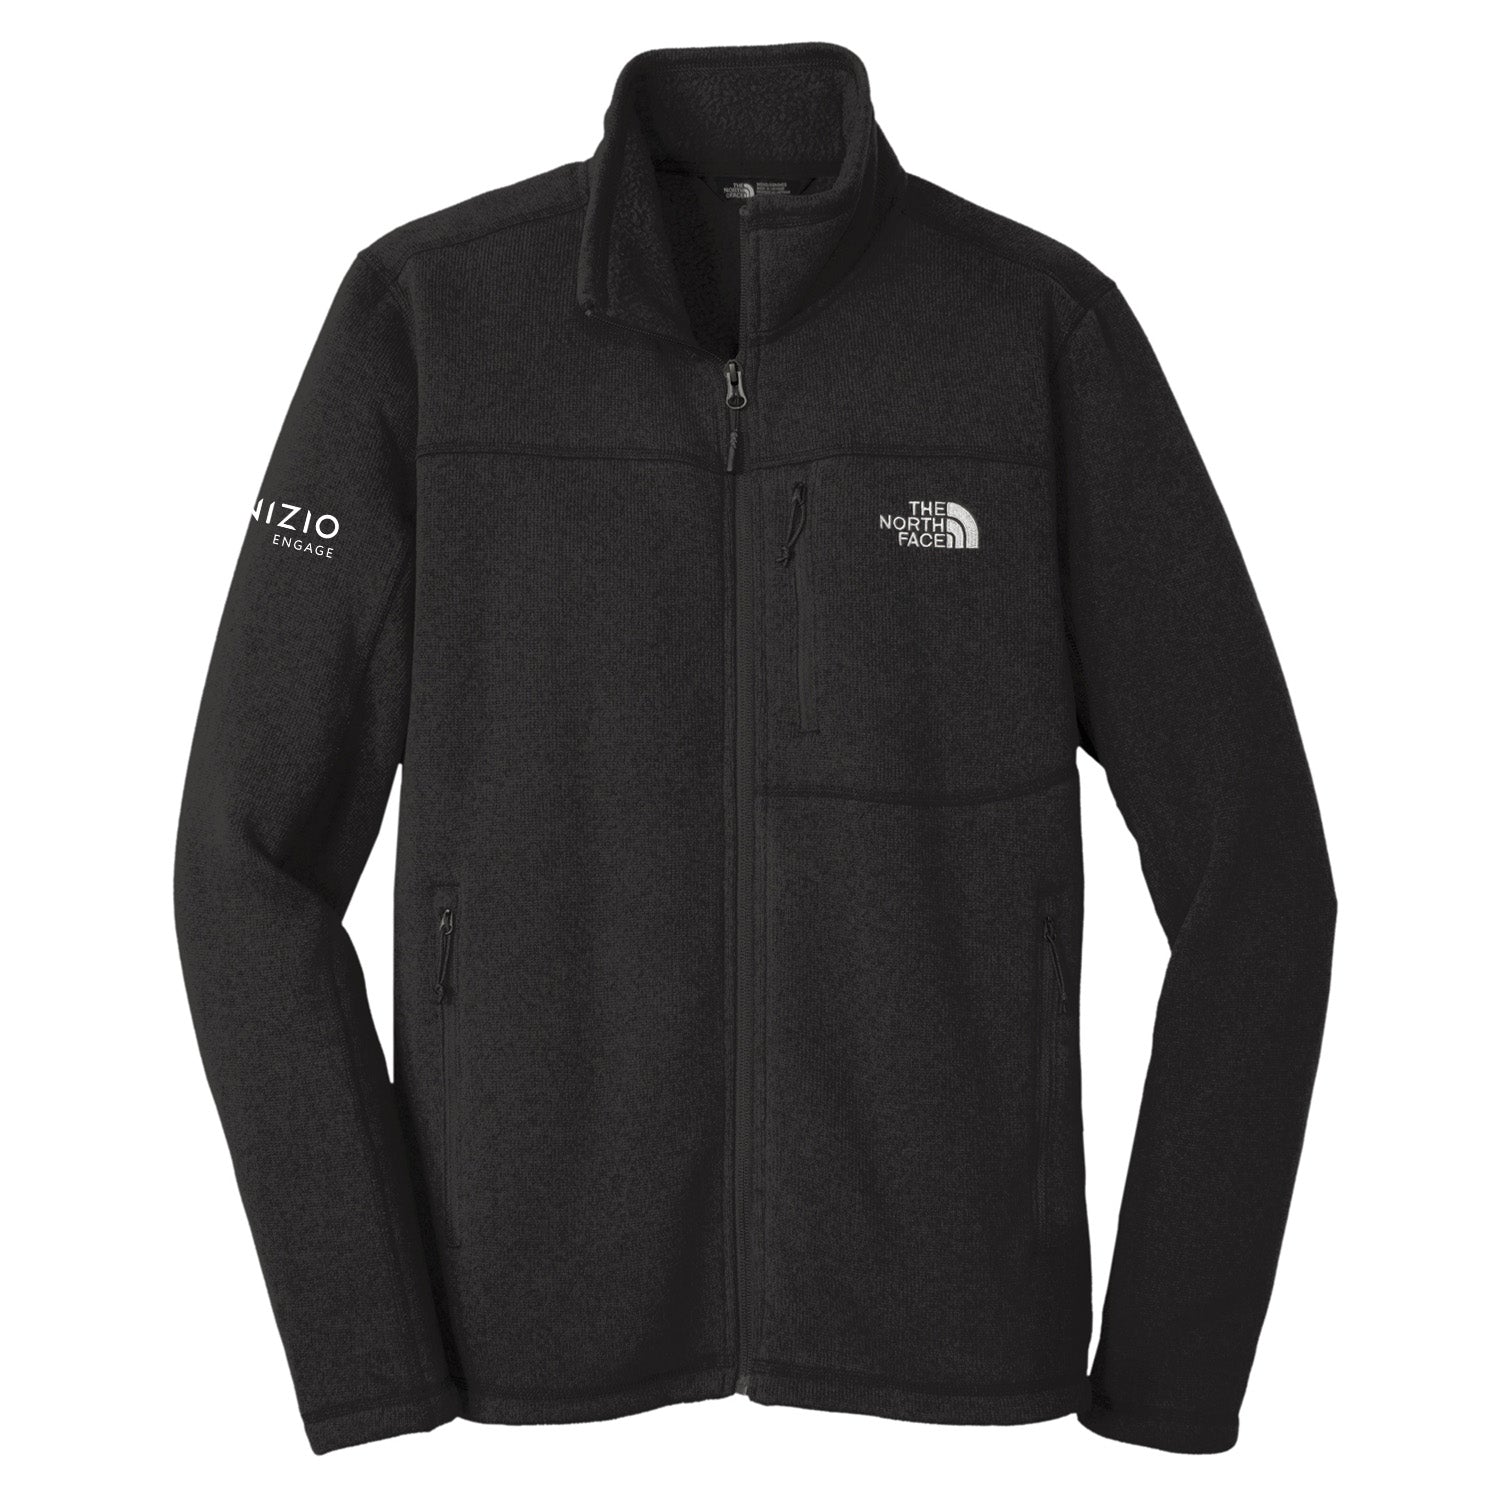 The North Face Sweater Fleece Jacket - Men's – Inizio Engage Store NA